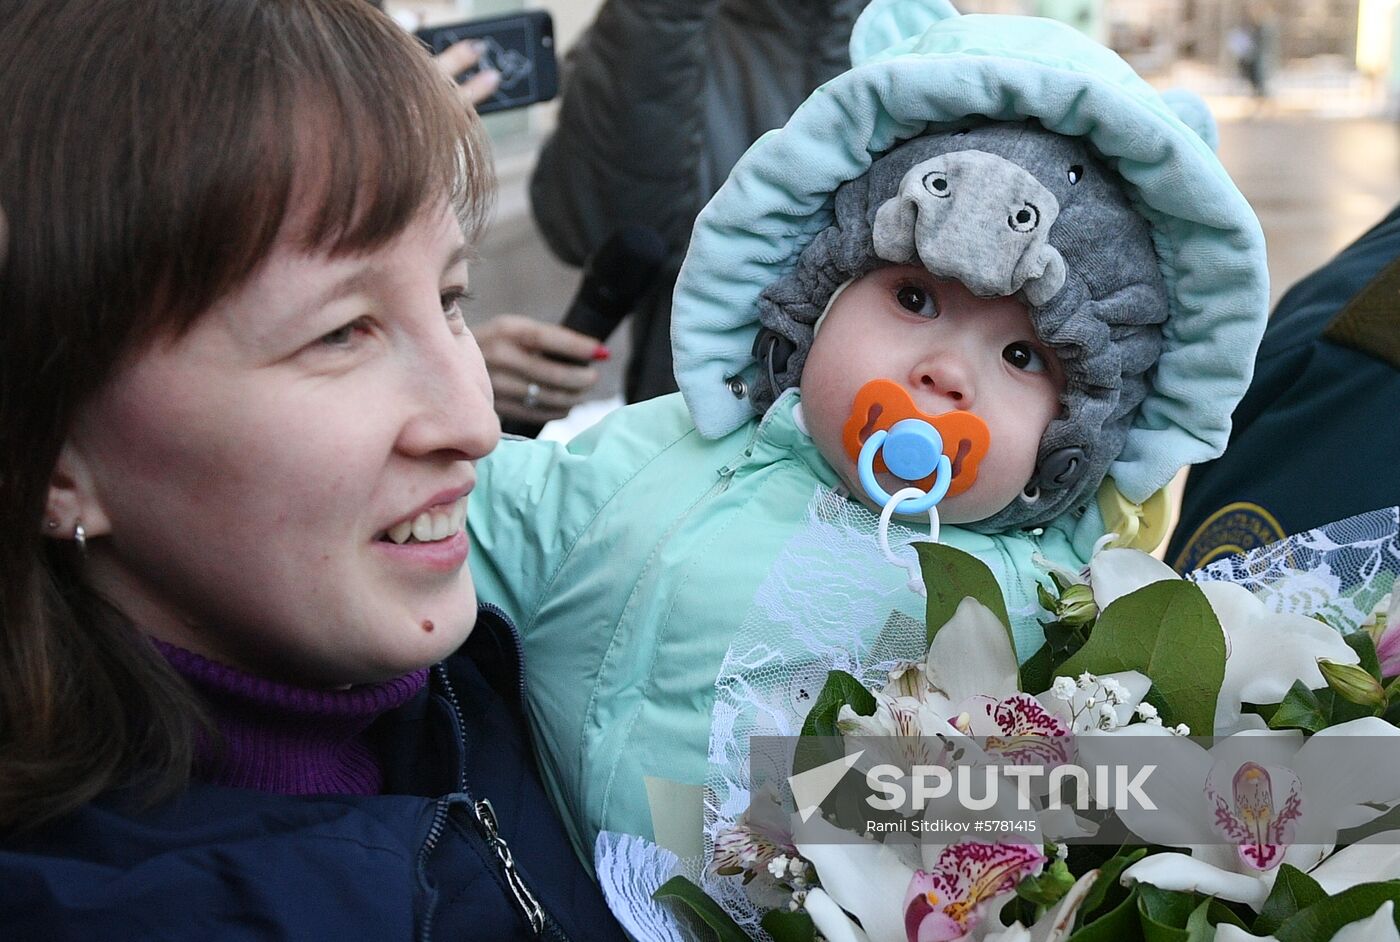 Russia Magnitogorsk Gas Explosion Boy Survived